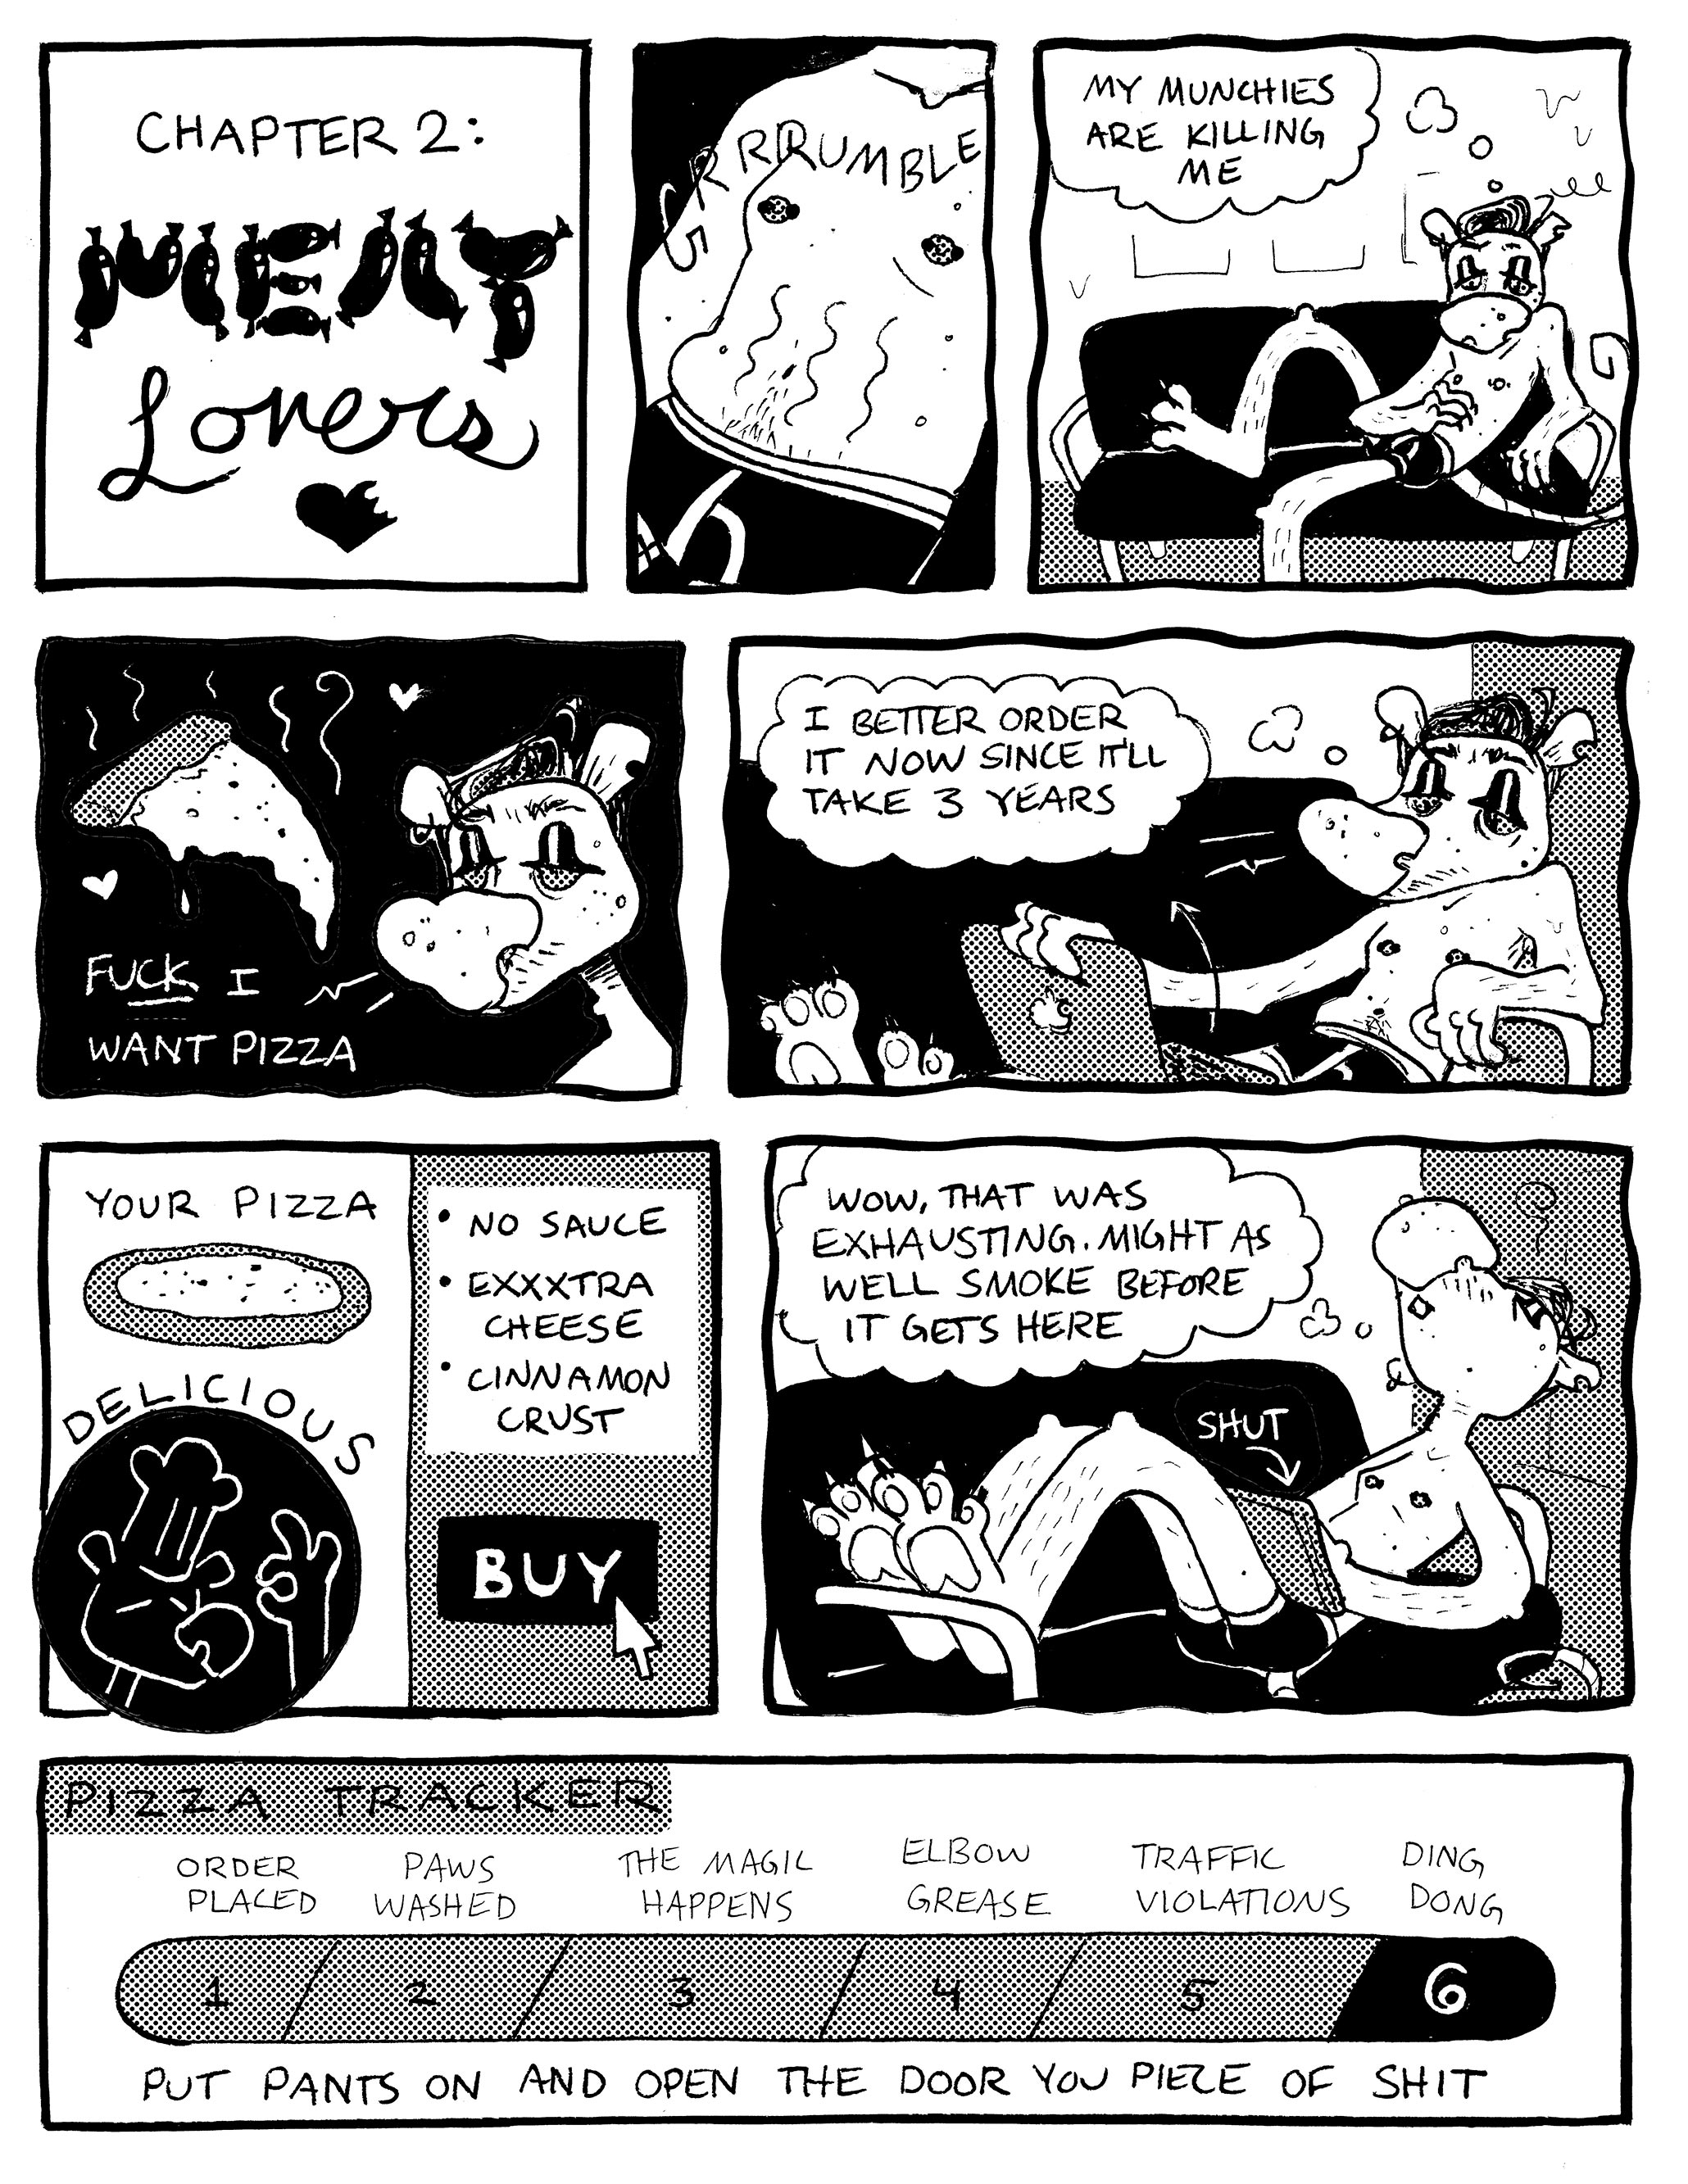 Comic page by Ansley Knight